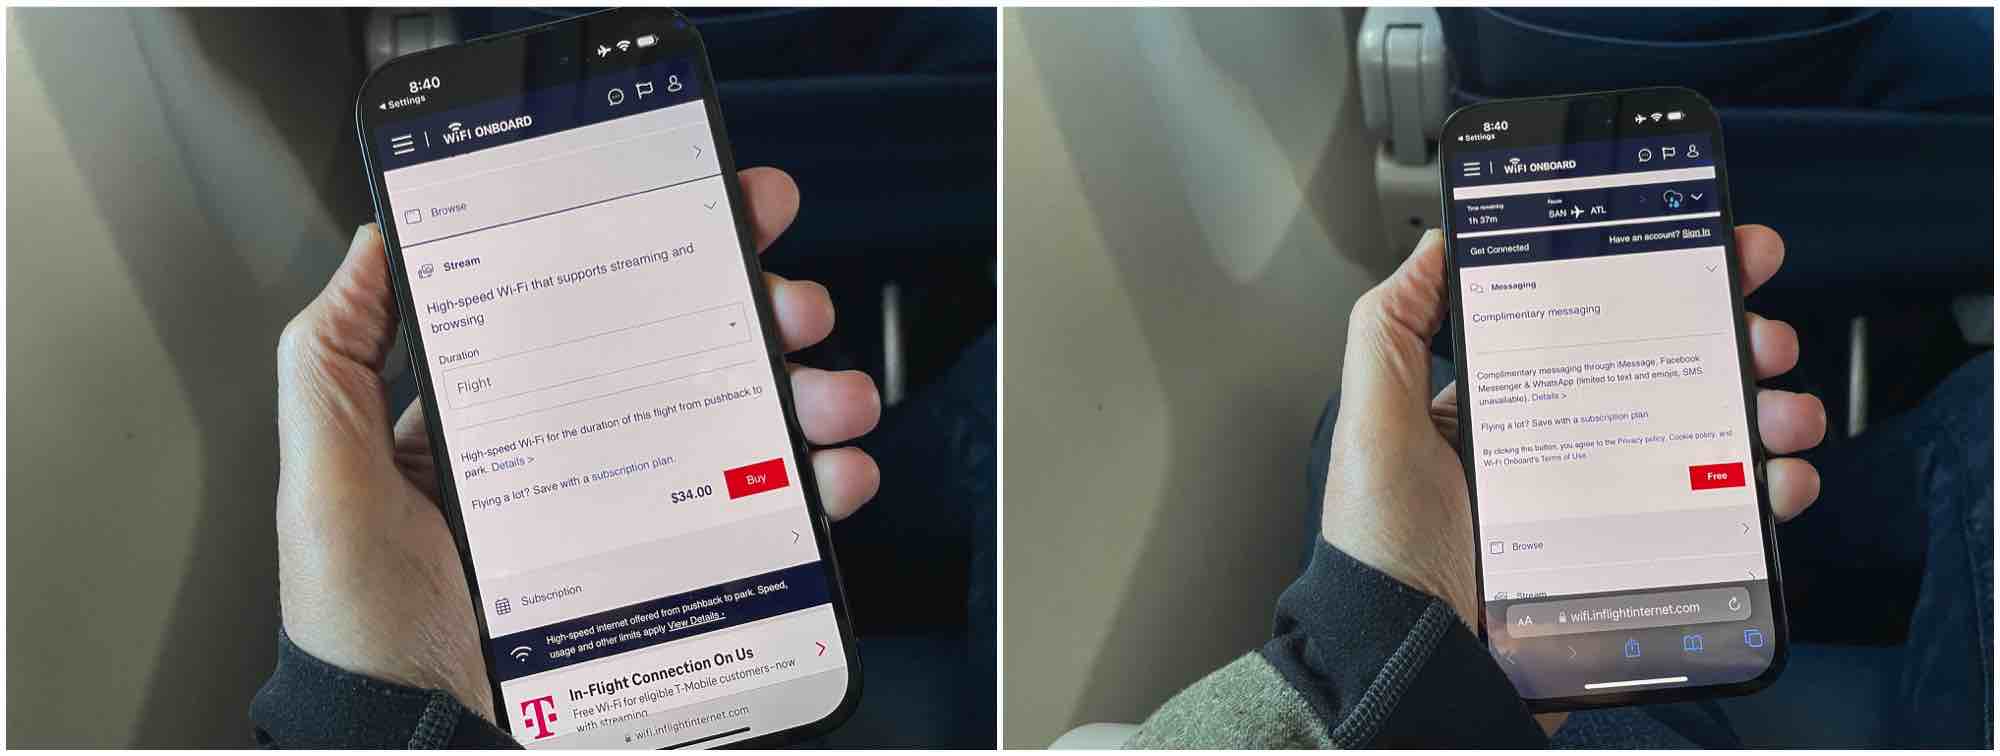 Delta air lines in flight messaging and internet access